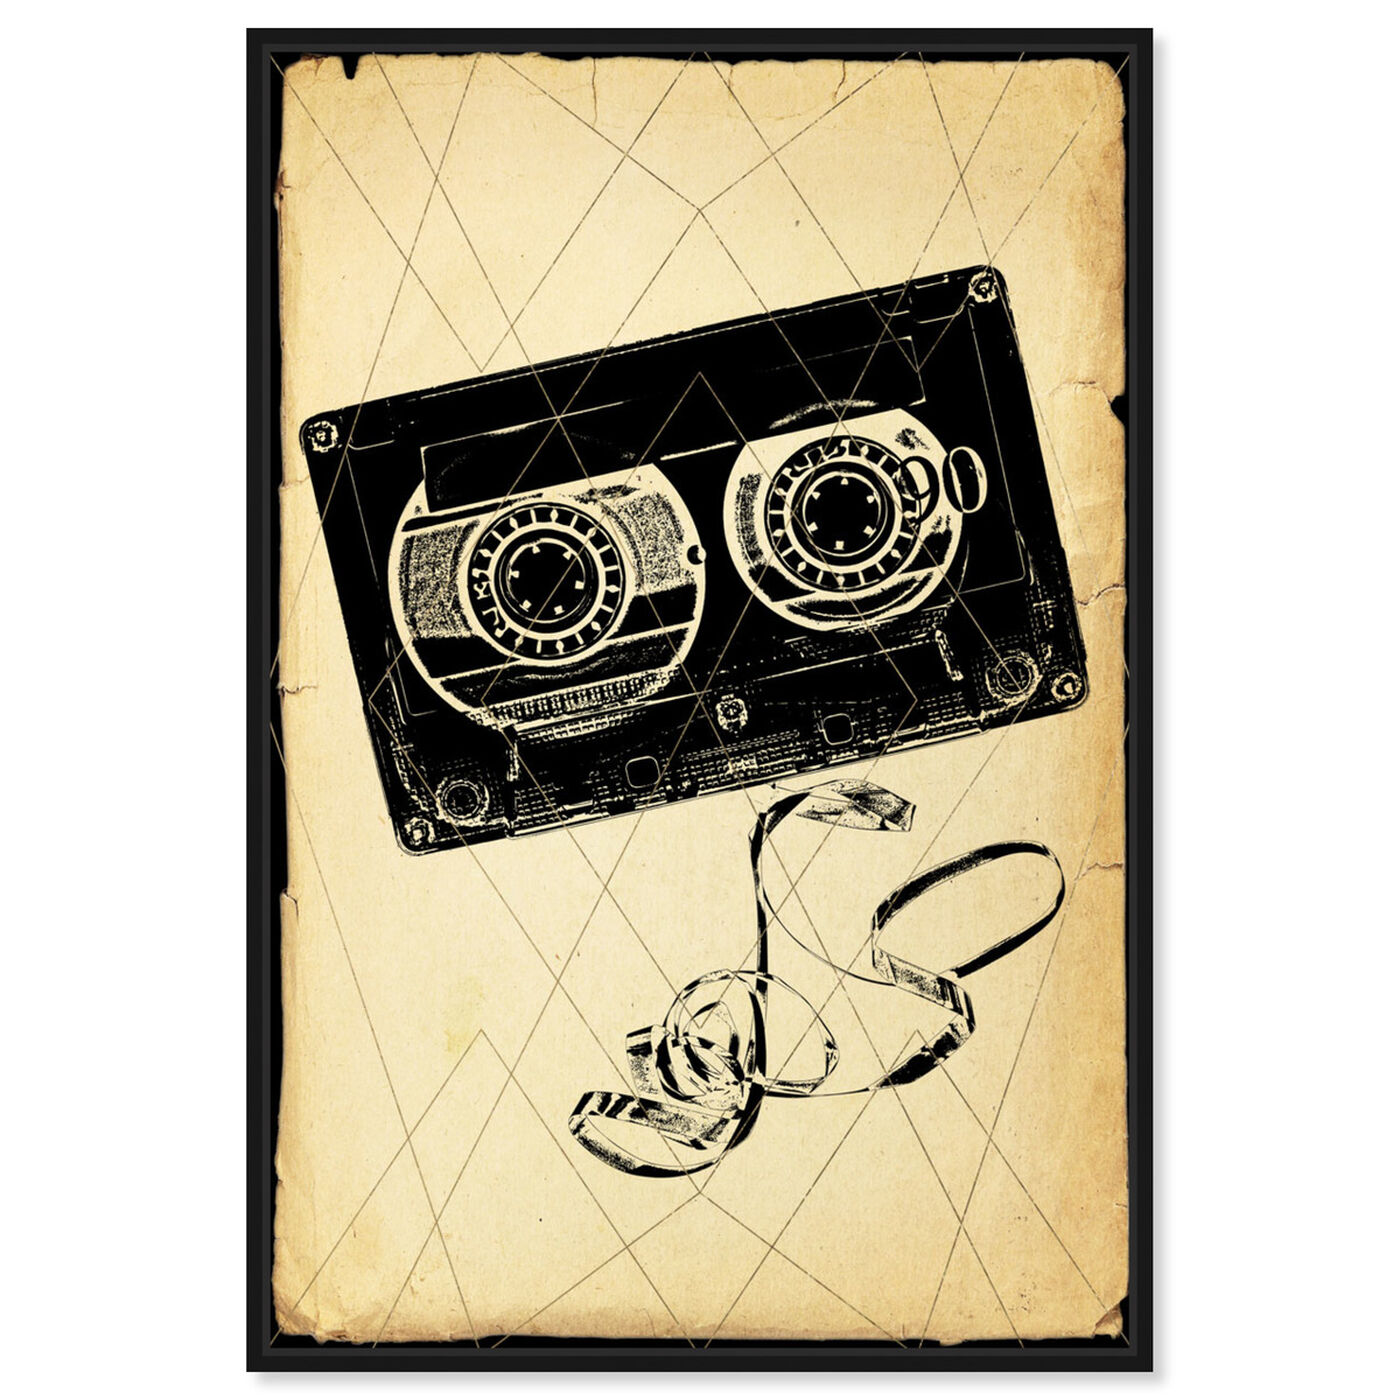 Front view of Cassette Tape Print featuring music and dance and dj art.